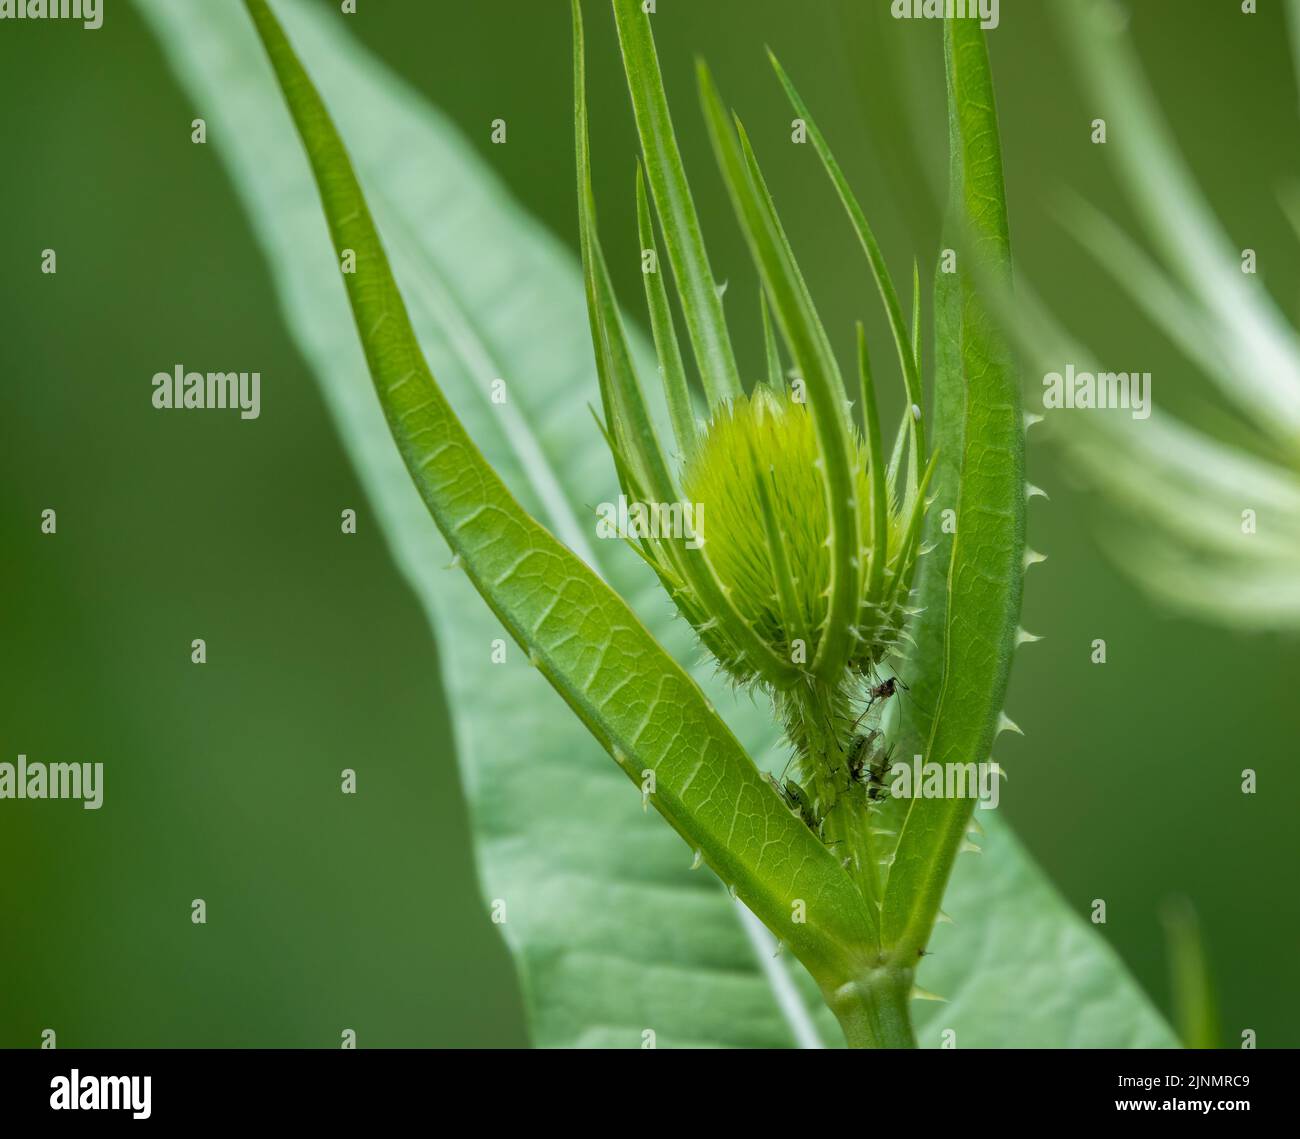 close-up of a summer green wild teasel (Dipsacus fullonum ) prickly spiky thistle Stock Photo